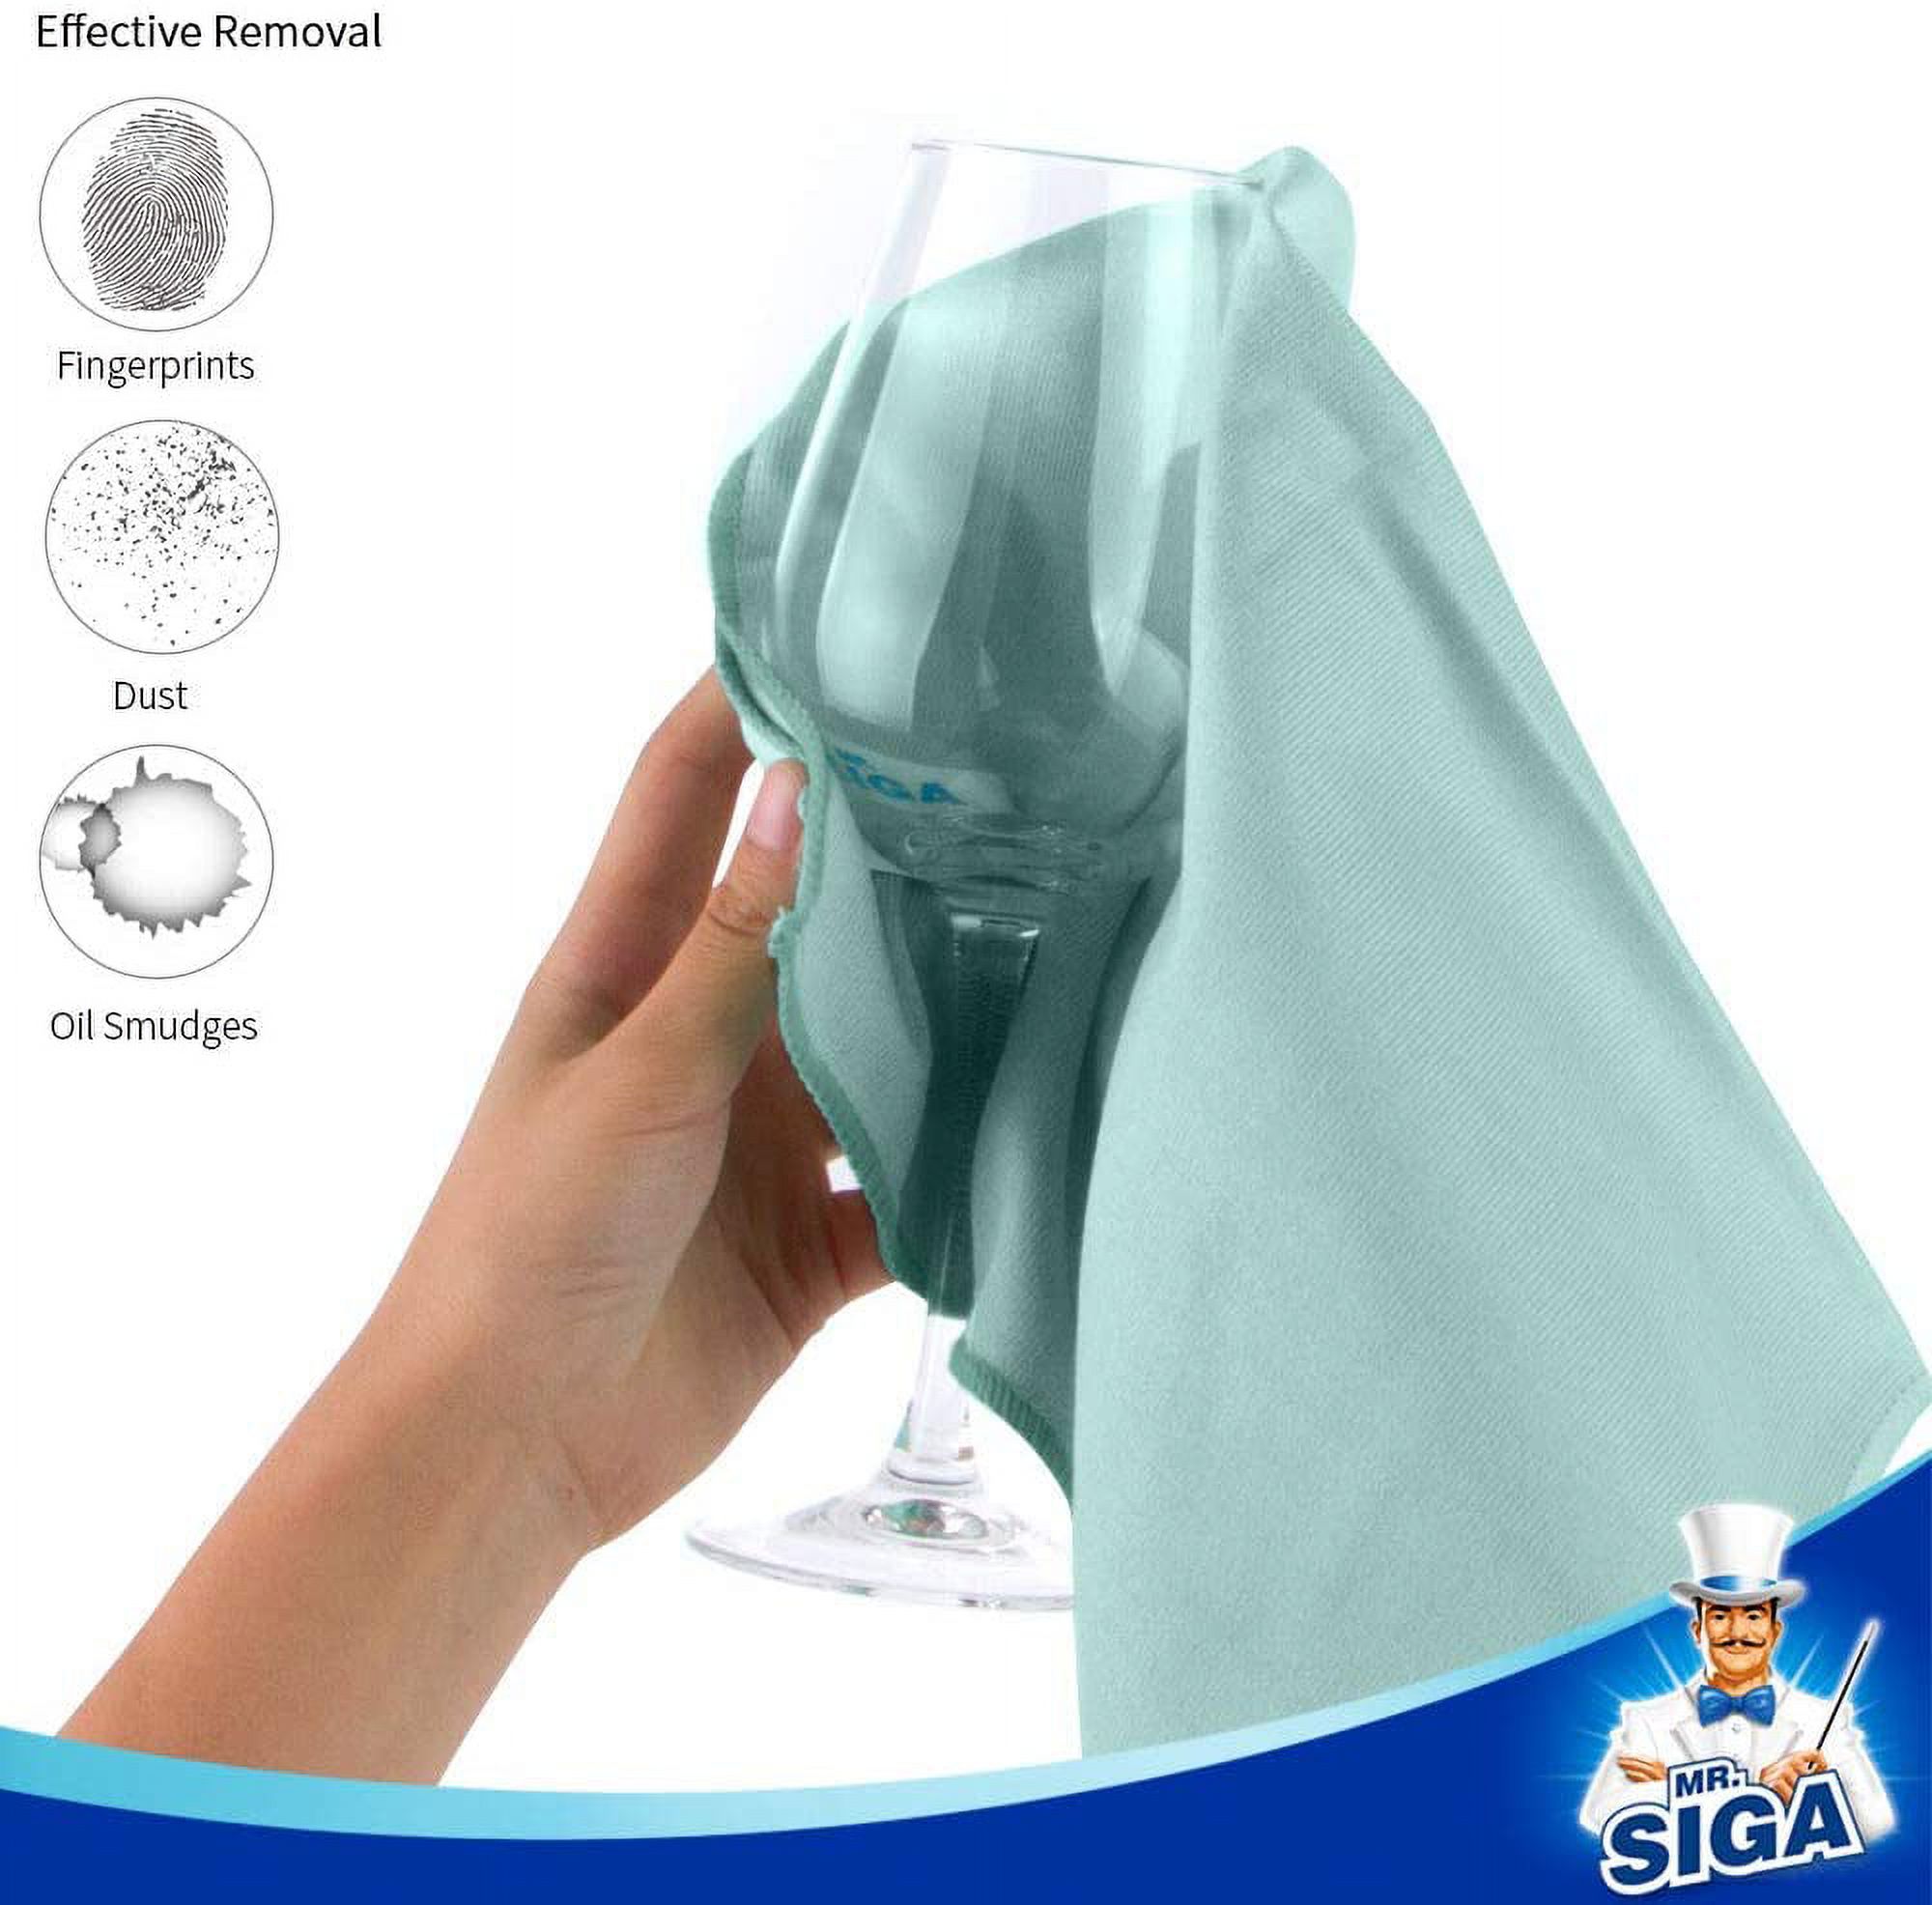 MR.Siga Ultra Fine Microfiber Cloths for Home, Car, and Glass,Pack of 6, 35 x 40 cm 13.7" x 15.7" - image 5 of 8